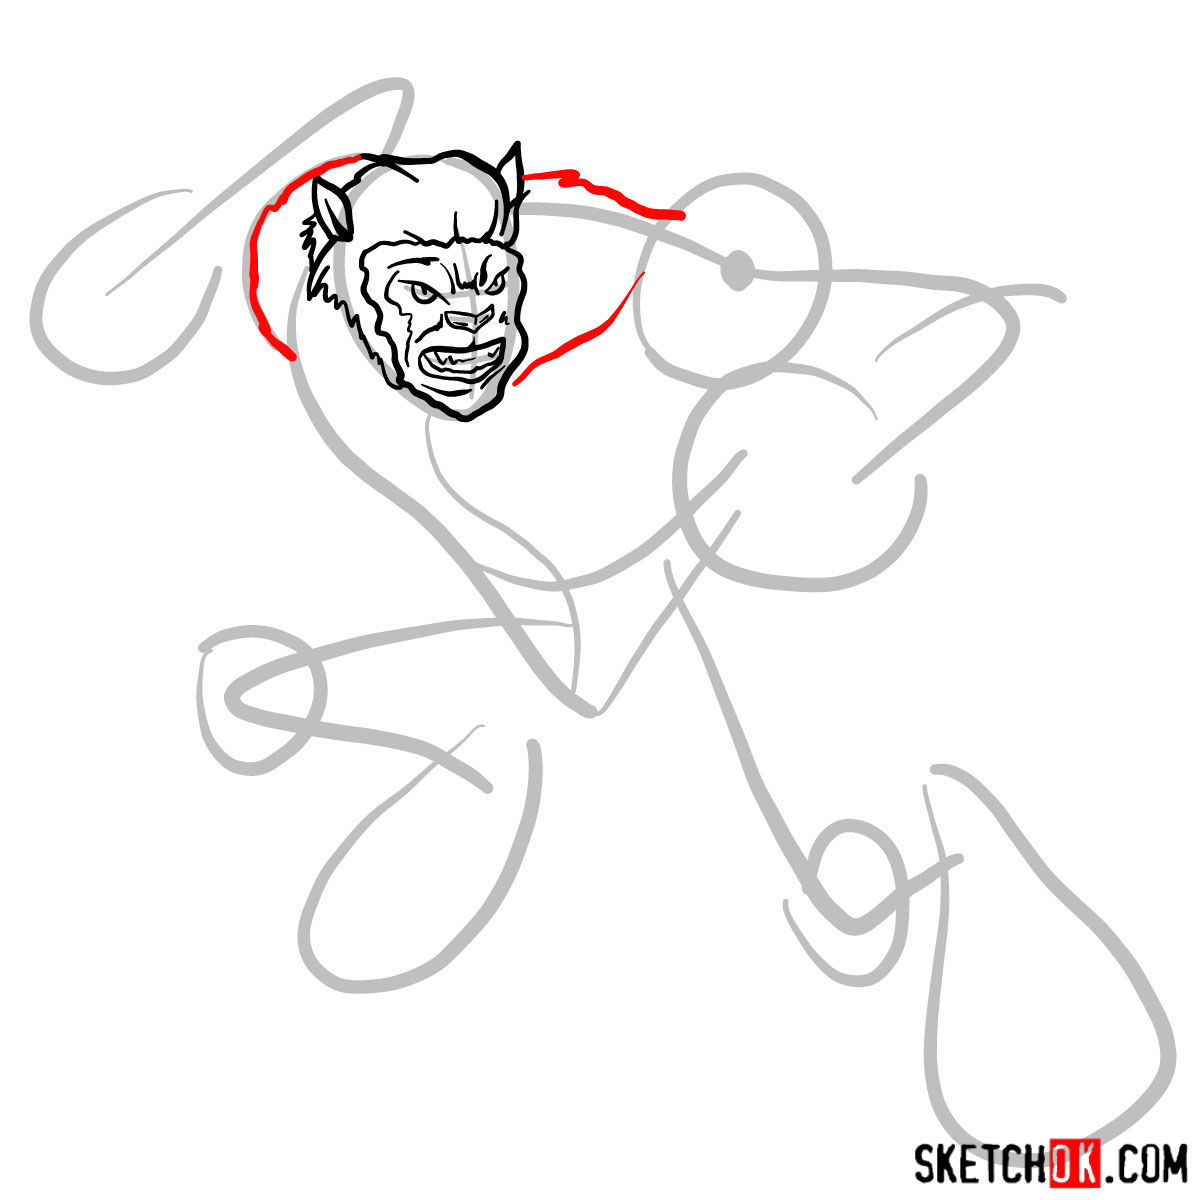 How to draw Beast (X-Men mutant) - step 05